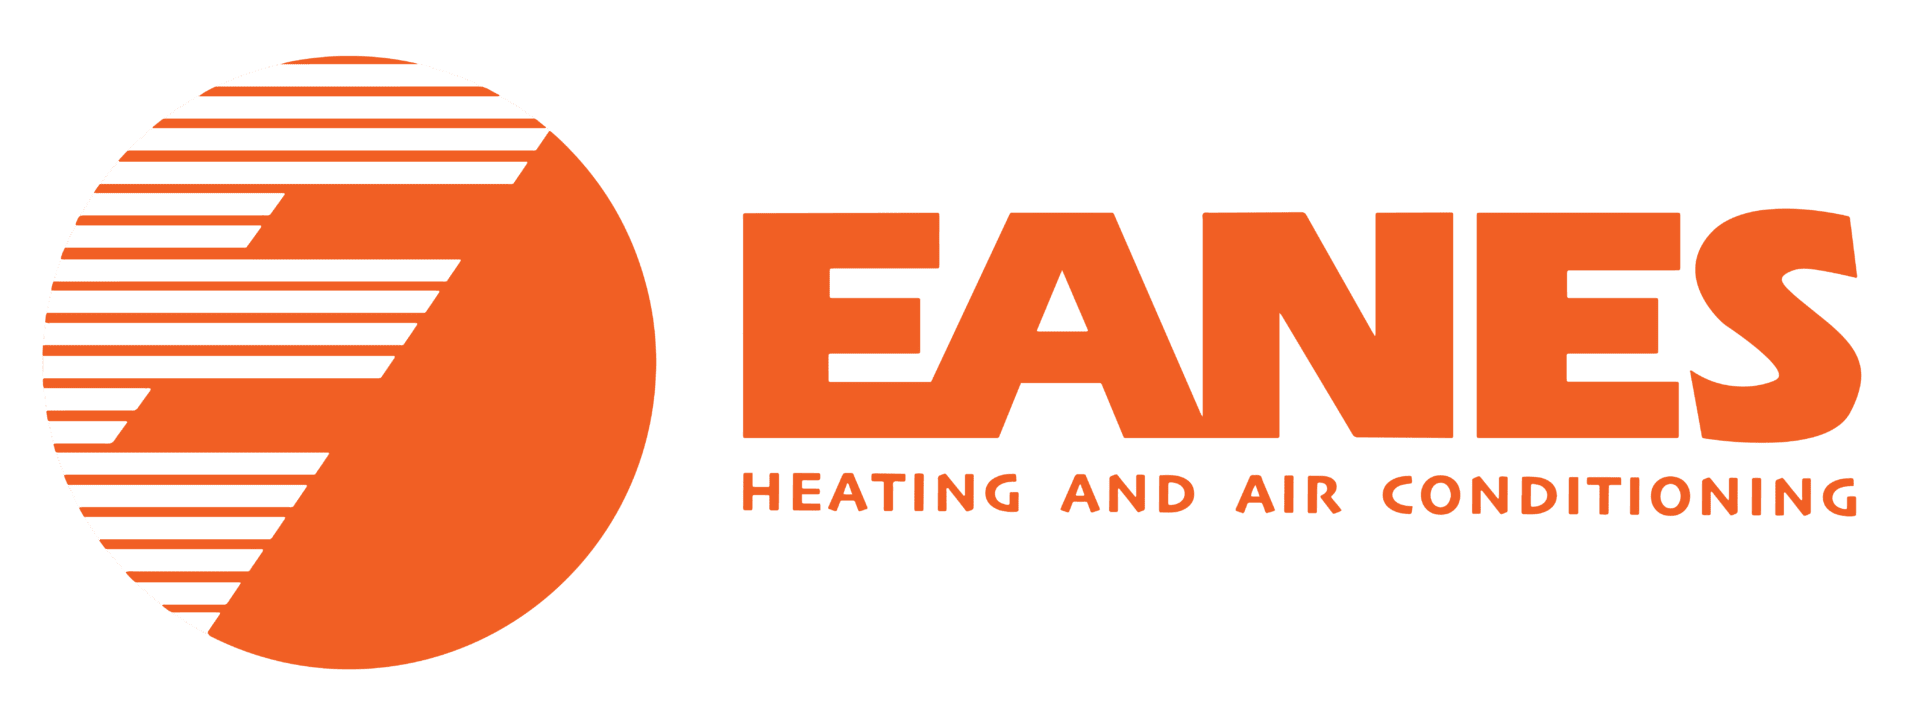 Heating System Installations & Replacements |  Eanes Heating & Air